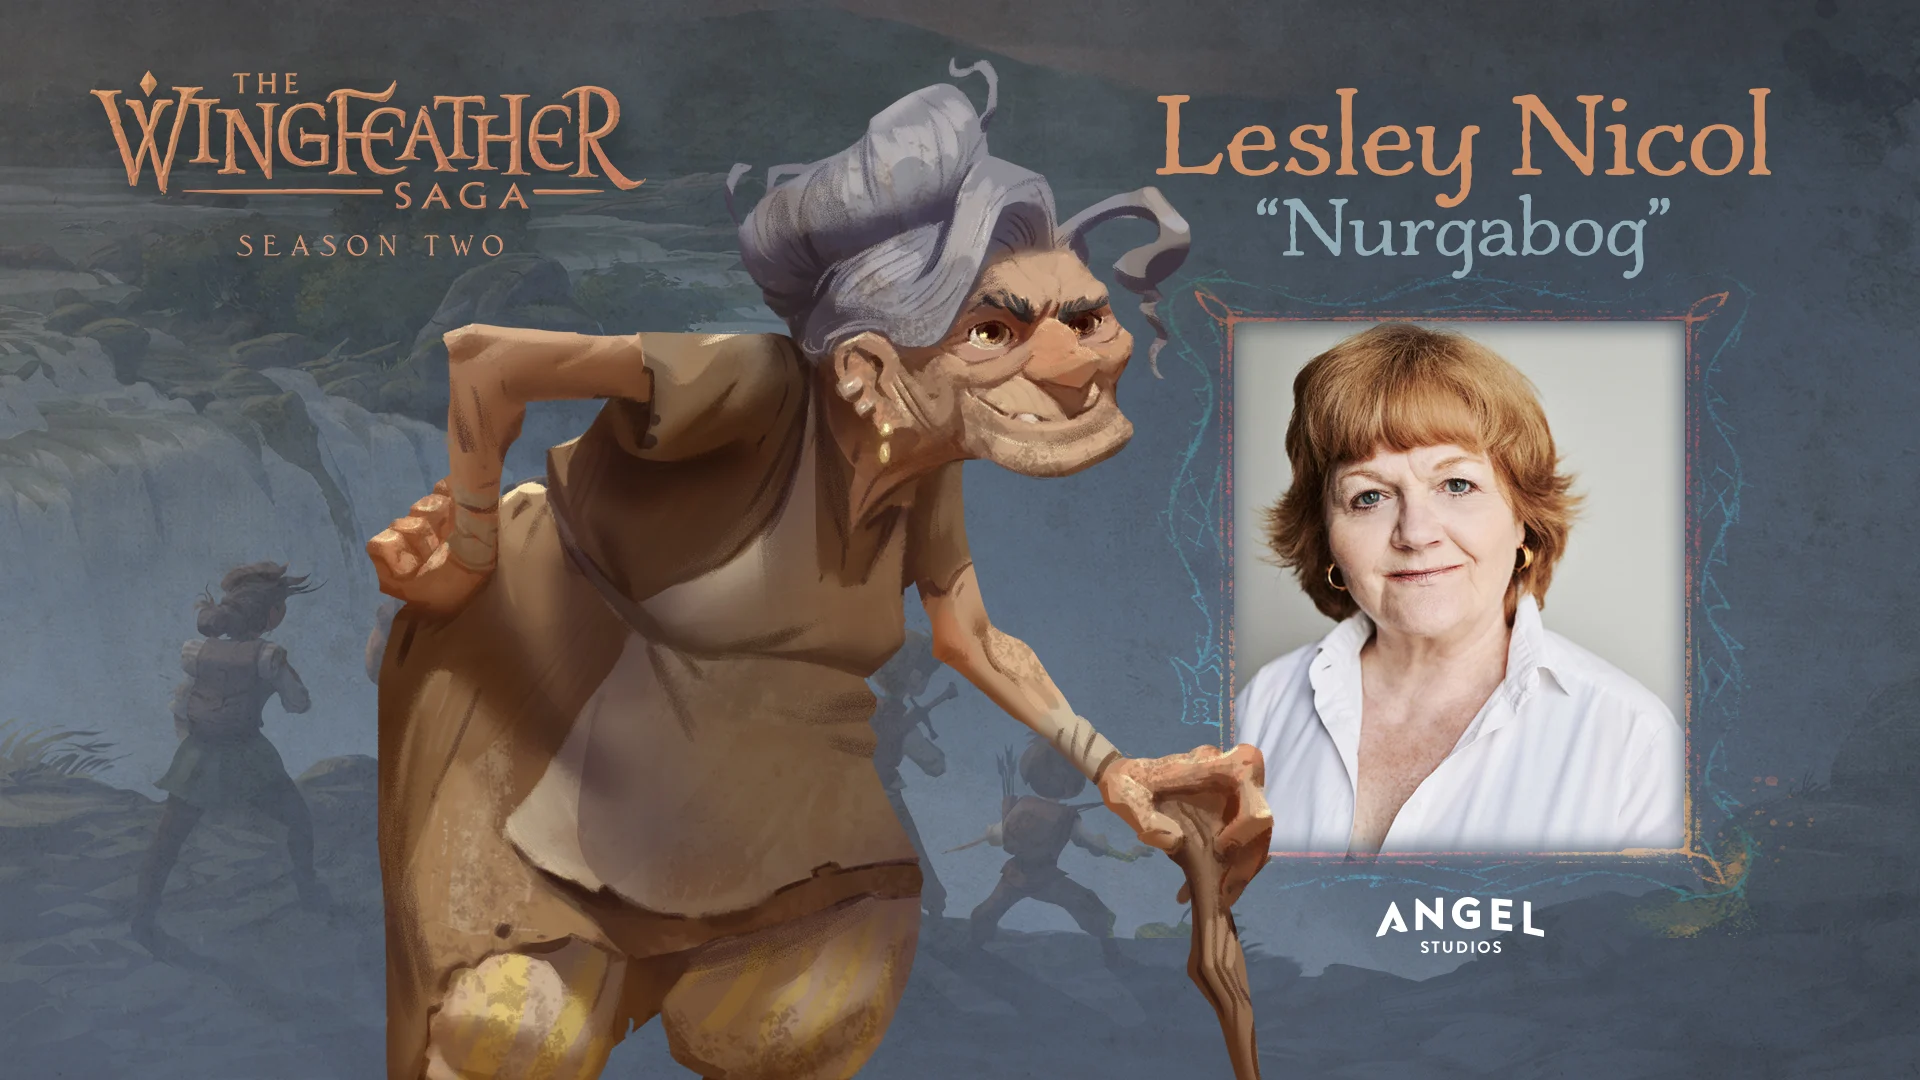 Image of Lesley Nicol Character Announcement